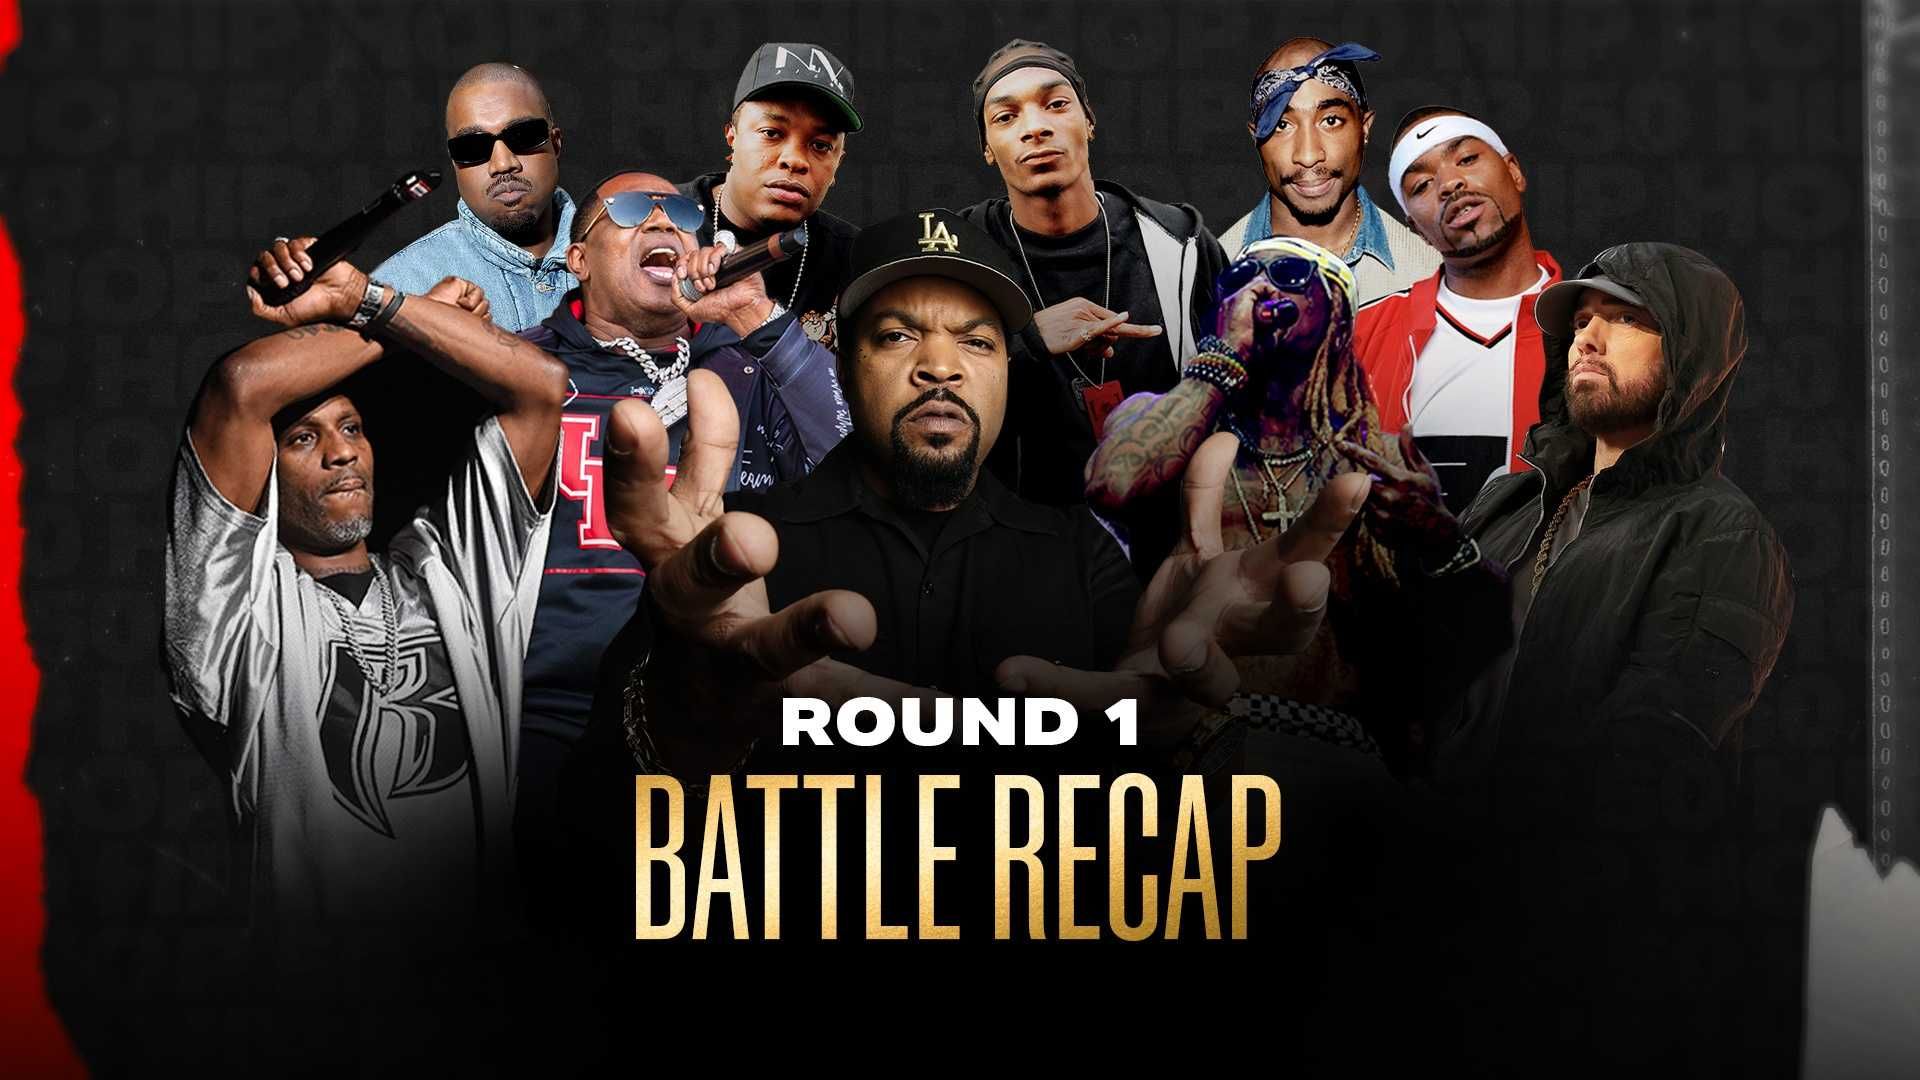 klamre sig Rullesten håndtag Who's The G.O.A.T. Rap Crew? Here's A Recap Of Round 1 | News | BET